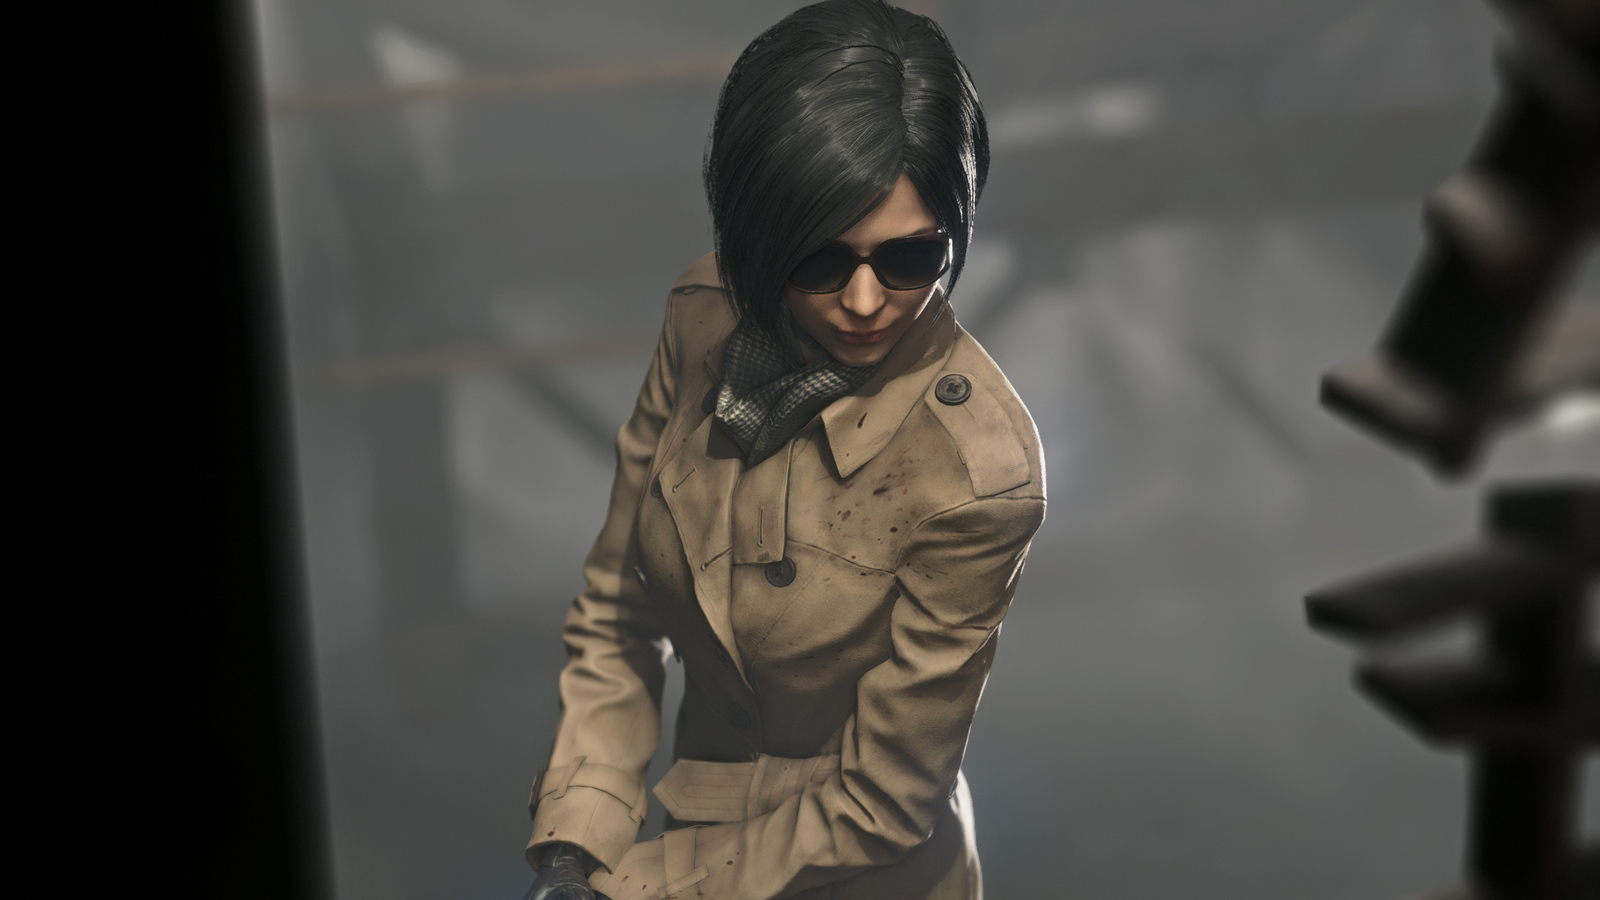 General 1600x900 Ada Wong Resident Evil 2 Resident Evil 2 Remake Game Mod video game characters